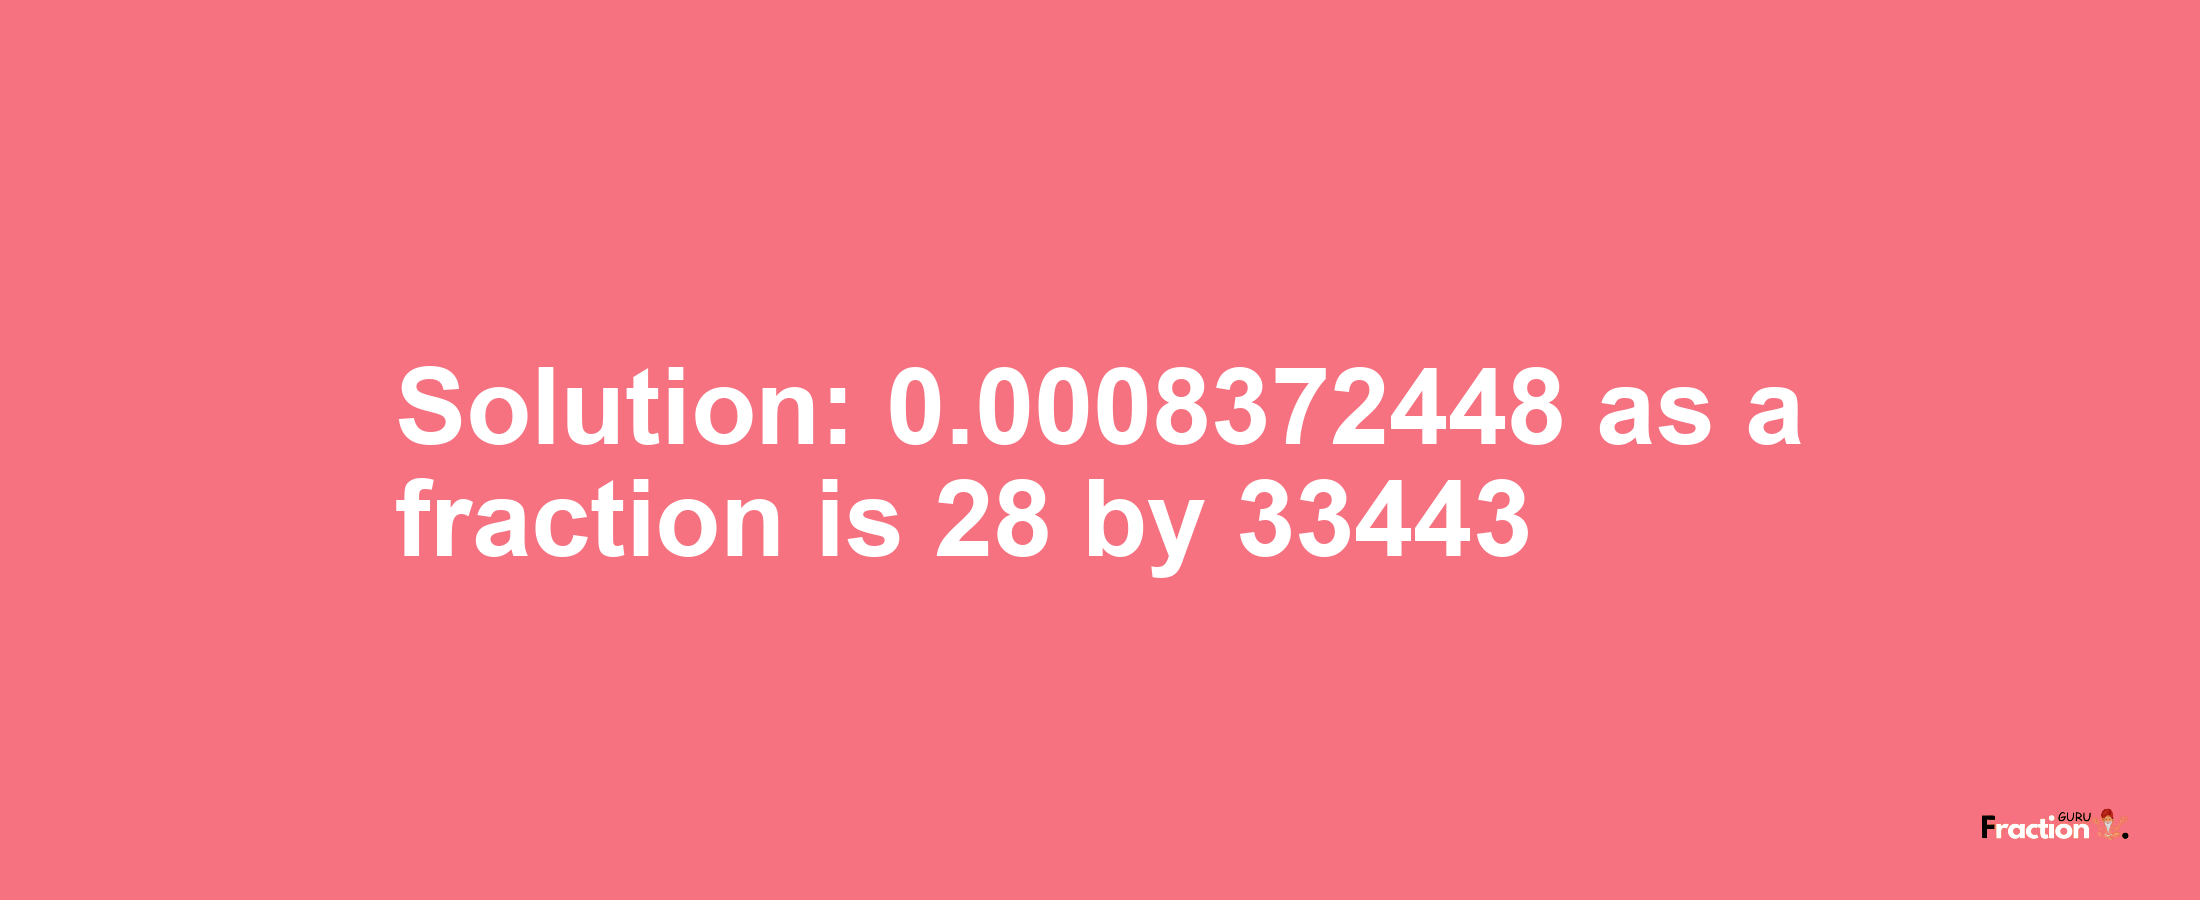 Solution:0.0008372448 as a fraction is 28/33443